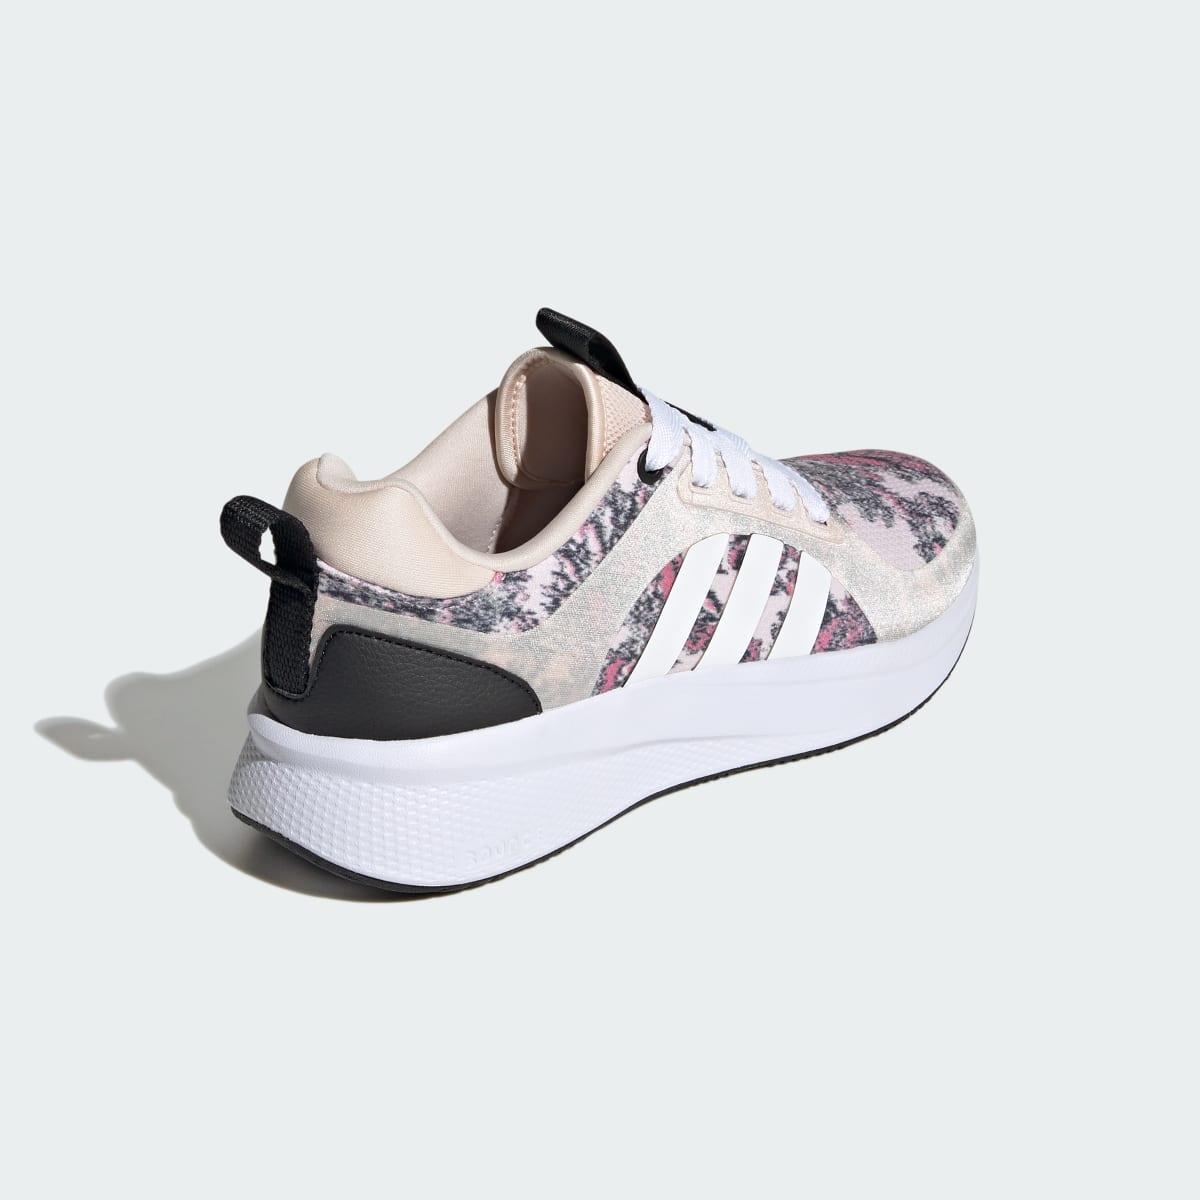 Adidas Edge Lux 6.0 Shoes. 6